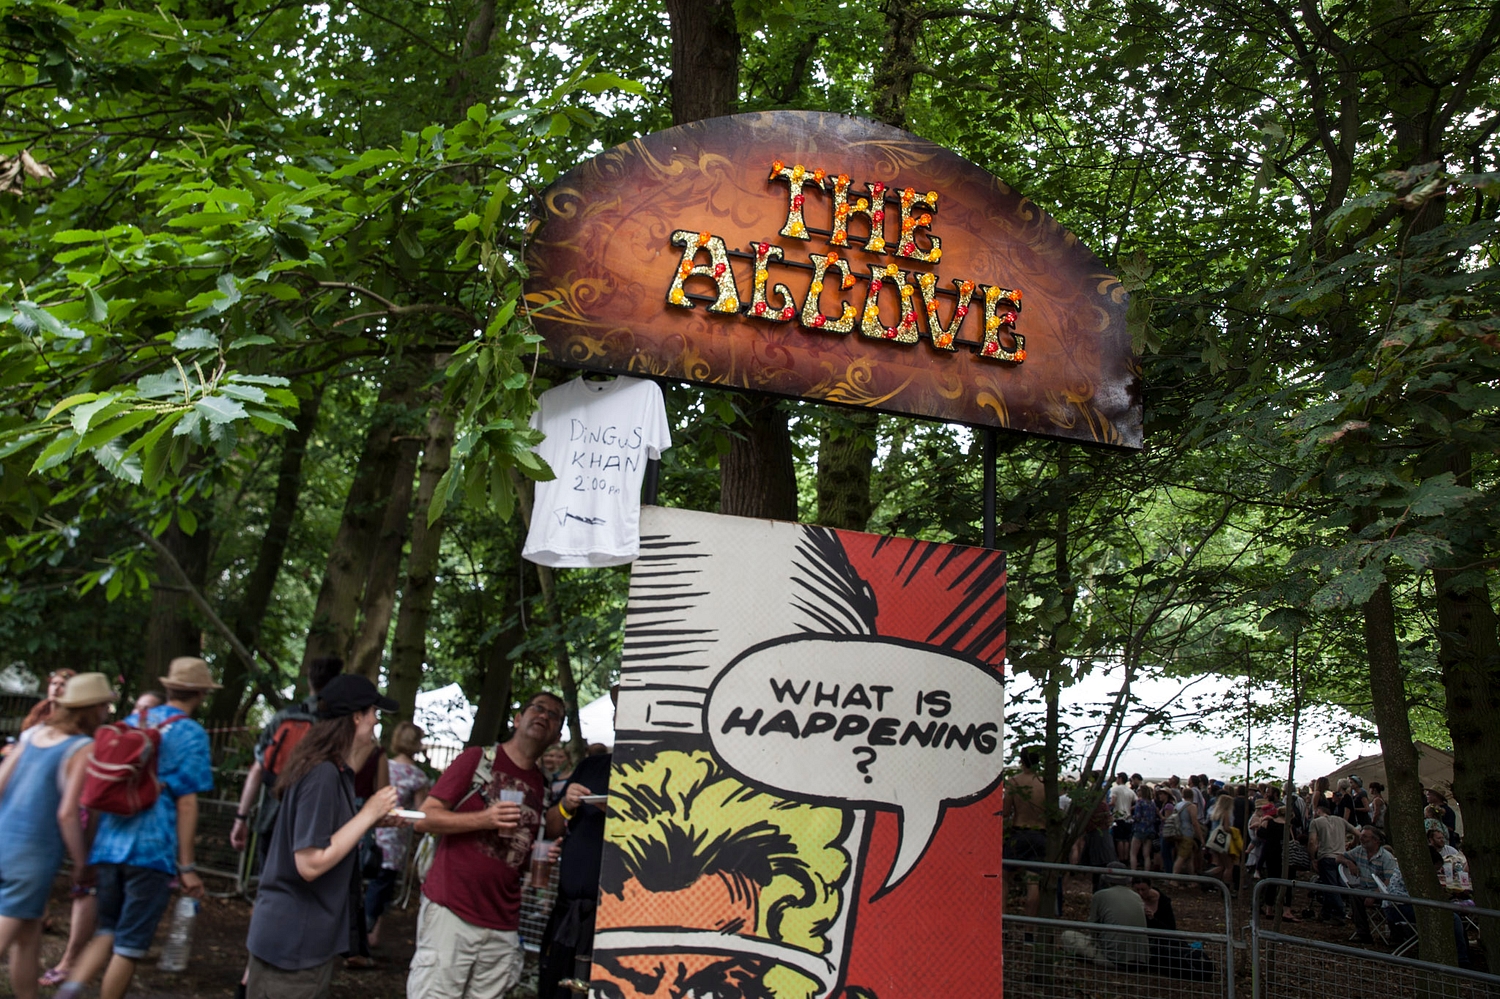 Latitude 2015 announces new names, including DIY Presents: The Alcove Stage